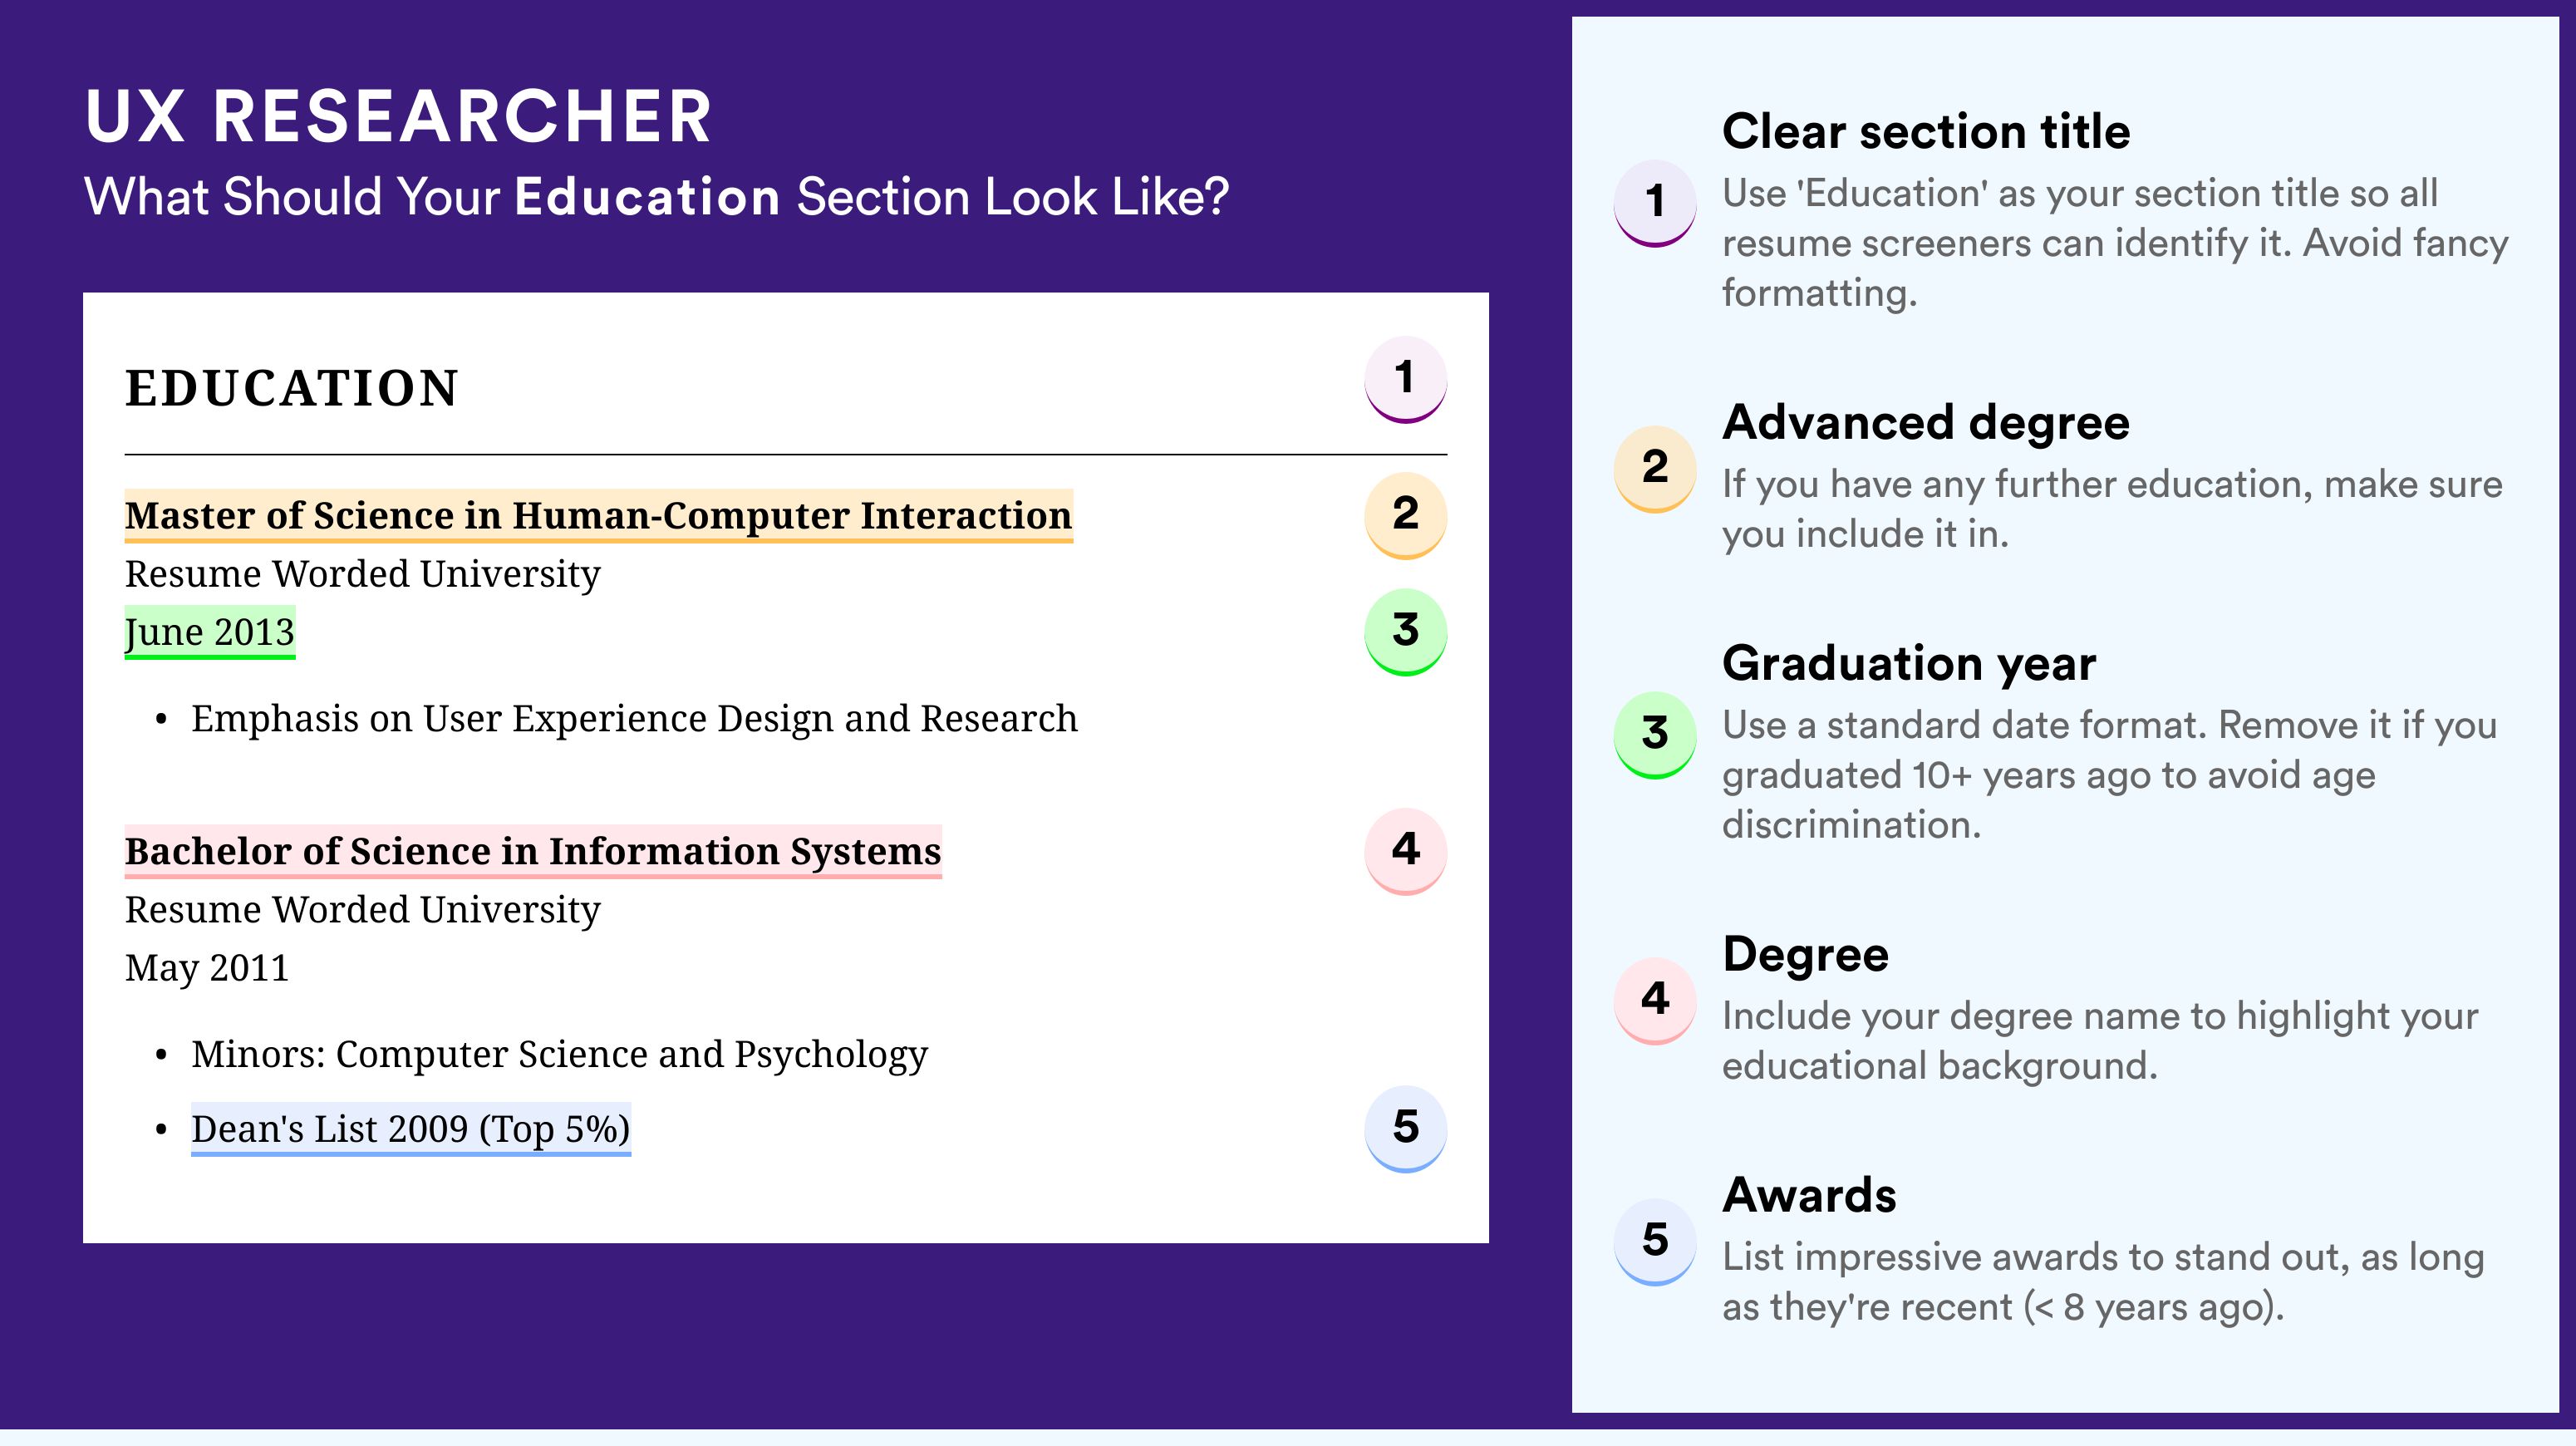 How To Write An Education Section - UX Researcher Roles